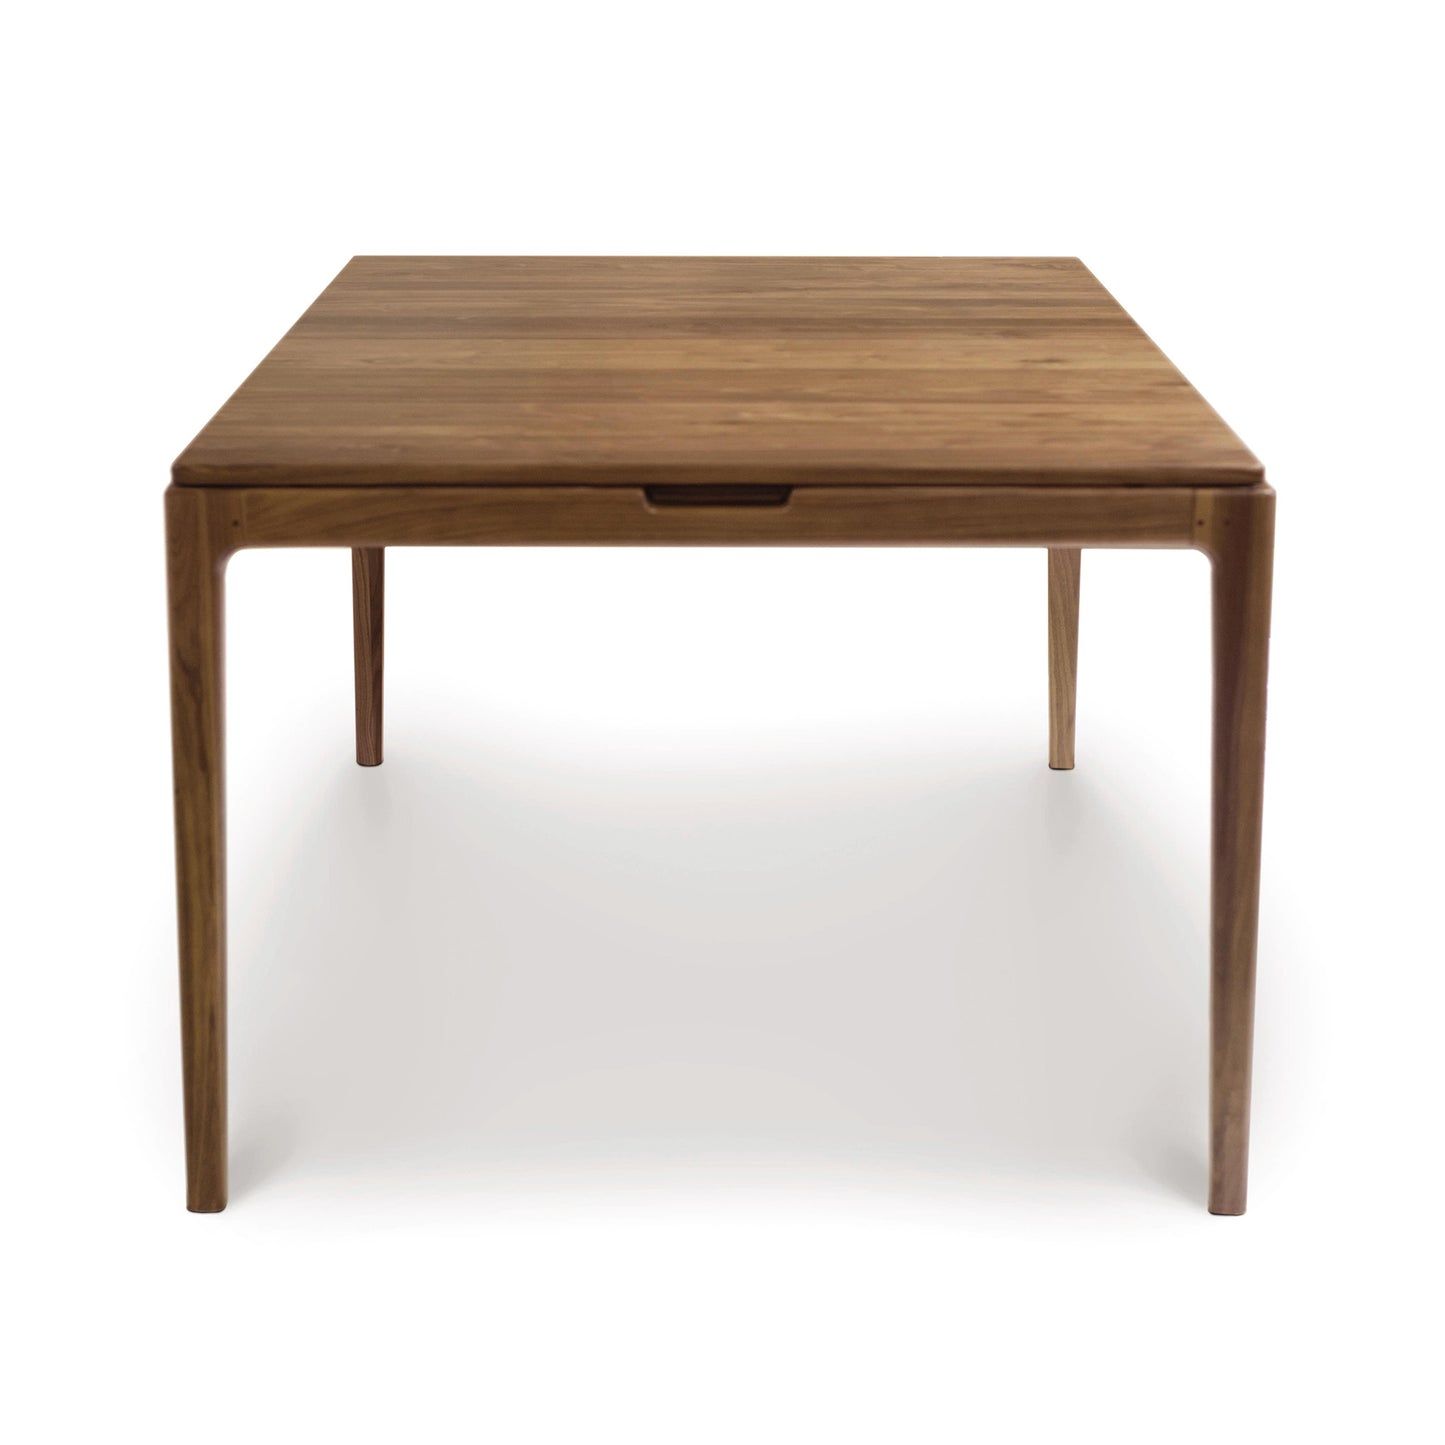 A solid walnut Lisse Extension Dining Table by Copeland Furniture with square top and four legs, isolated on a white background.